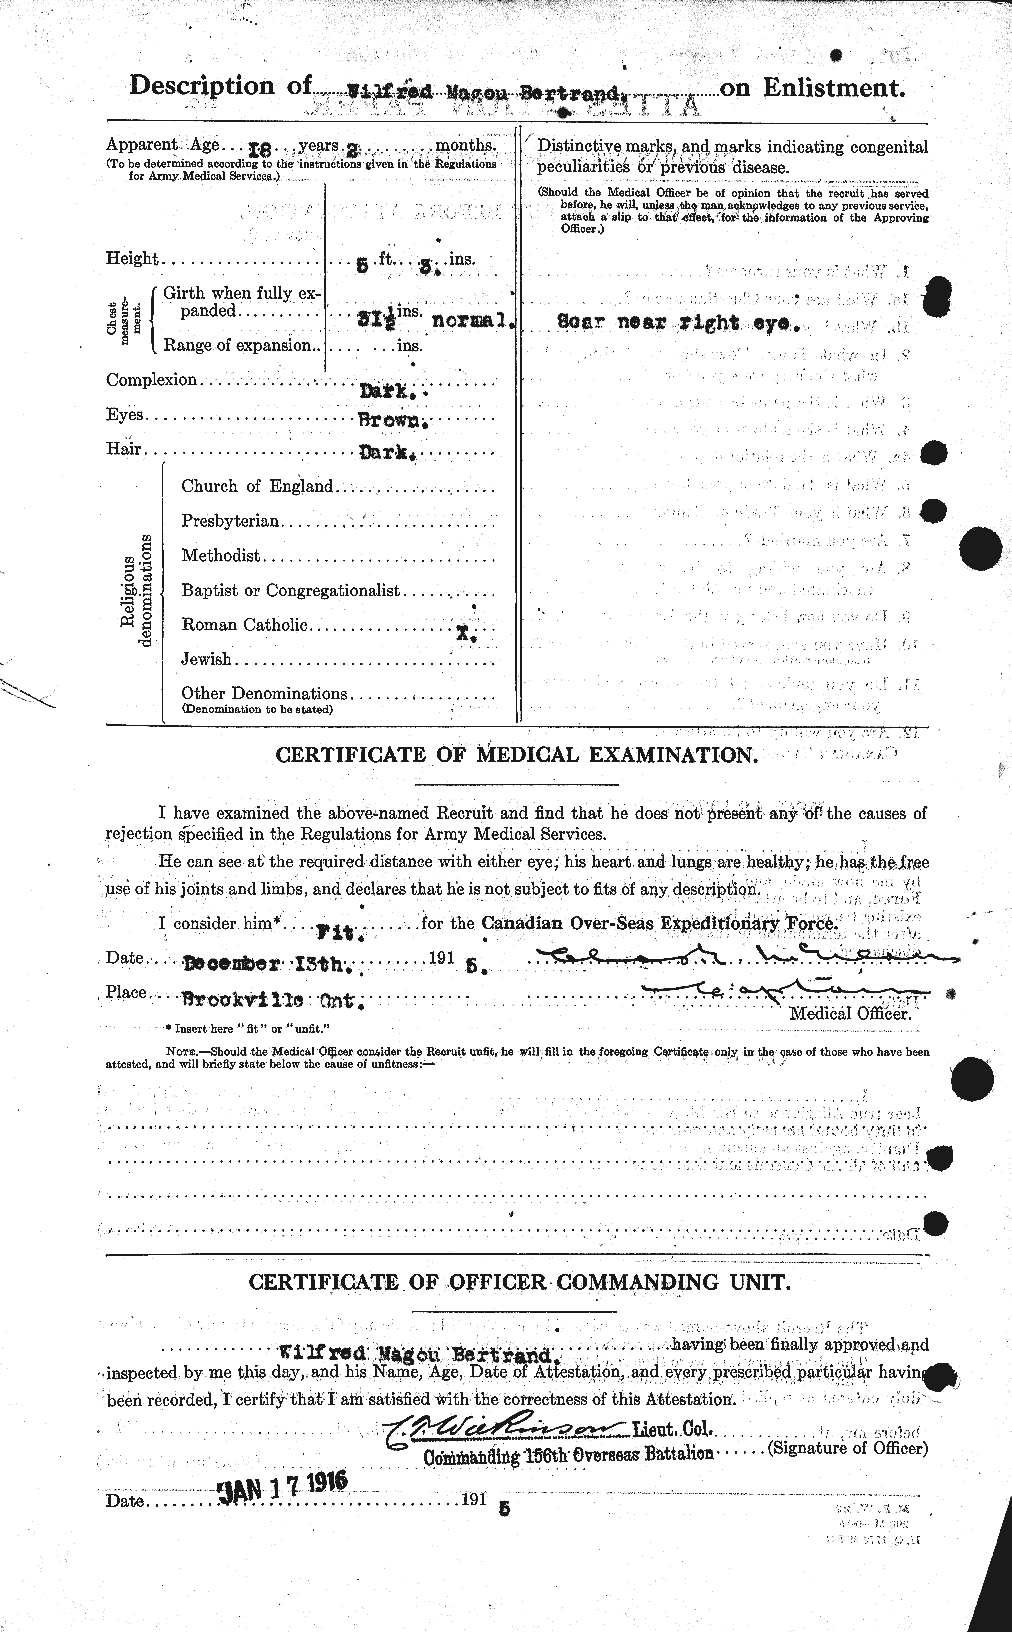 Personnel Records of the First World War - CEF 238848b